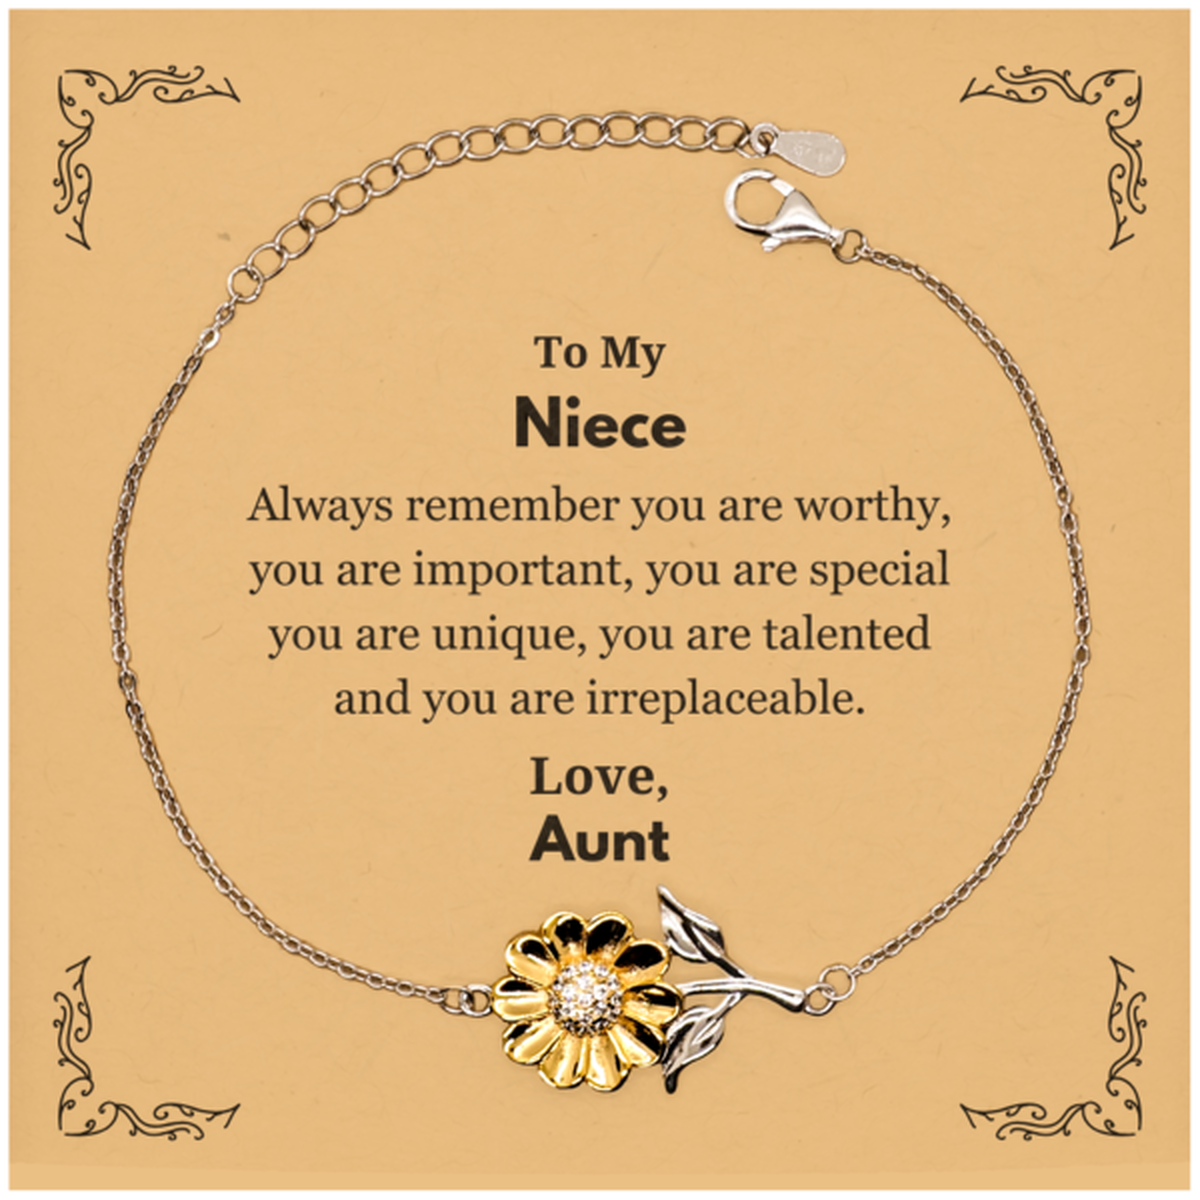 Niece Birthday Gifts from Aunt, Inspirational Sunflower Bracelet for Niece Christmas Graduation Gifts for Niece Always remember you are worthy, you are important. Love, Aunt